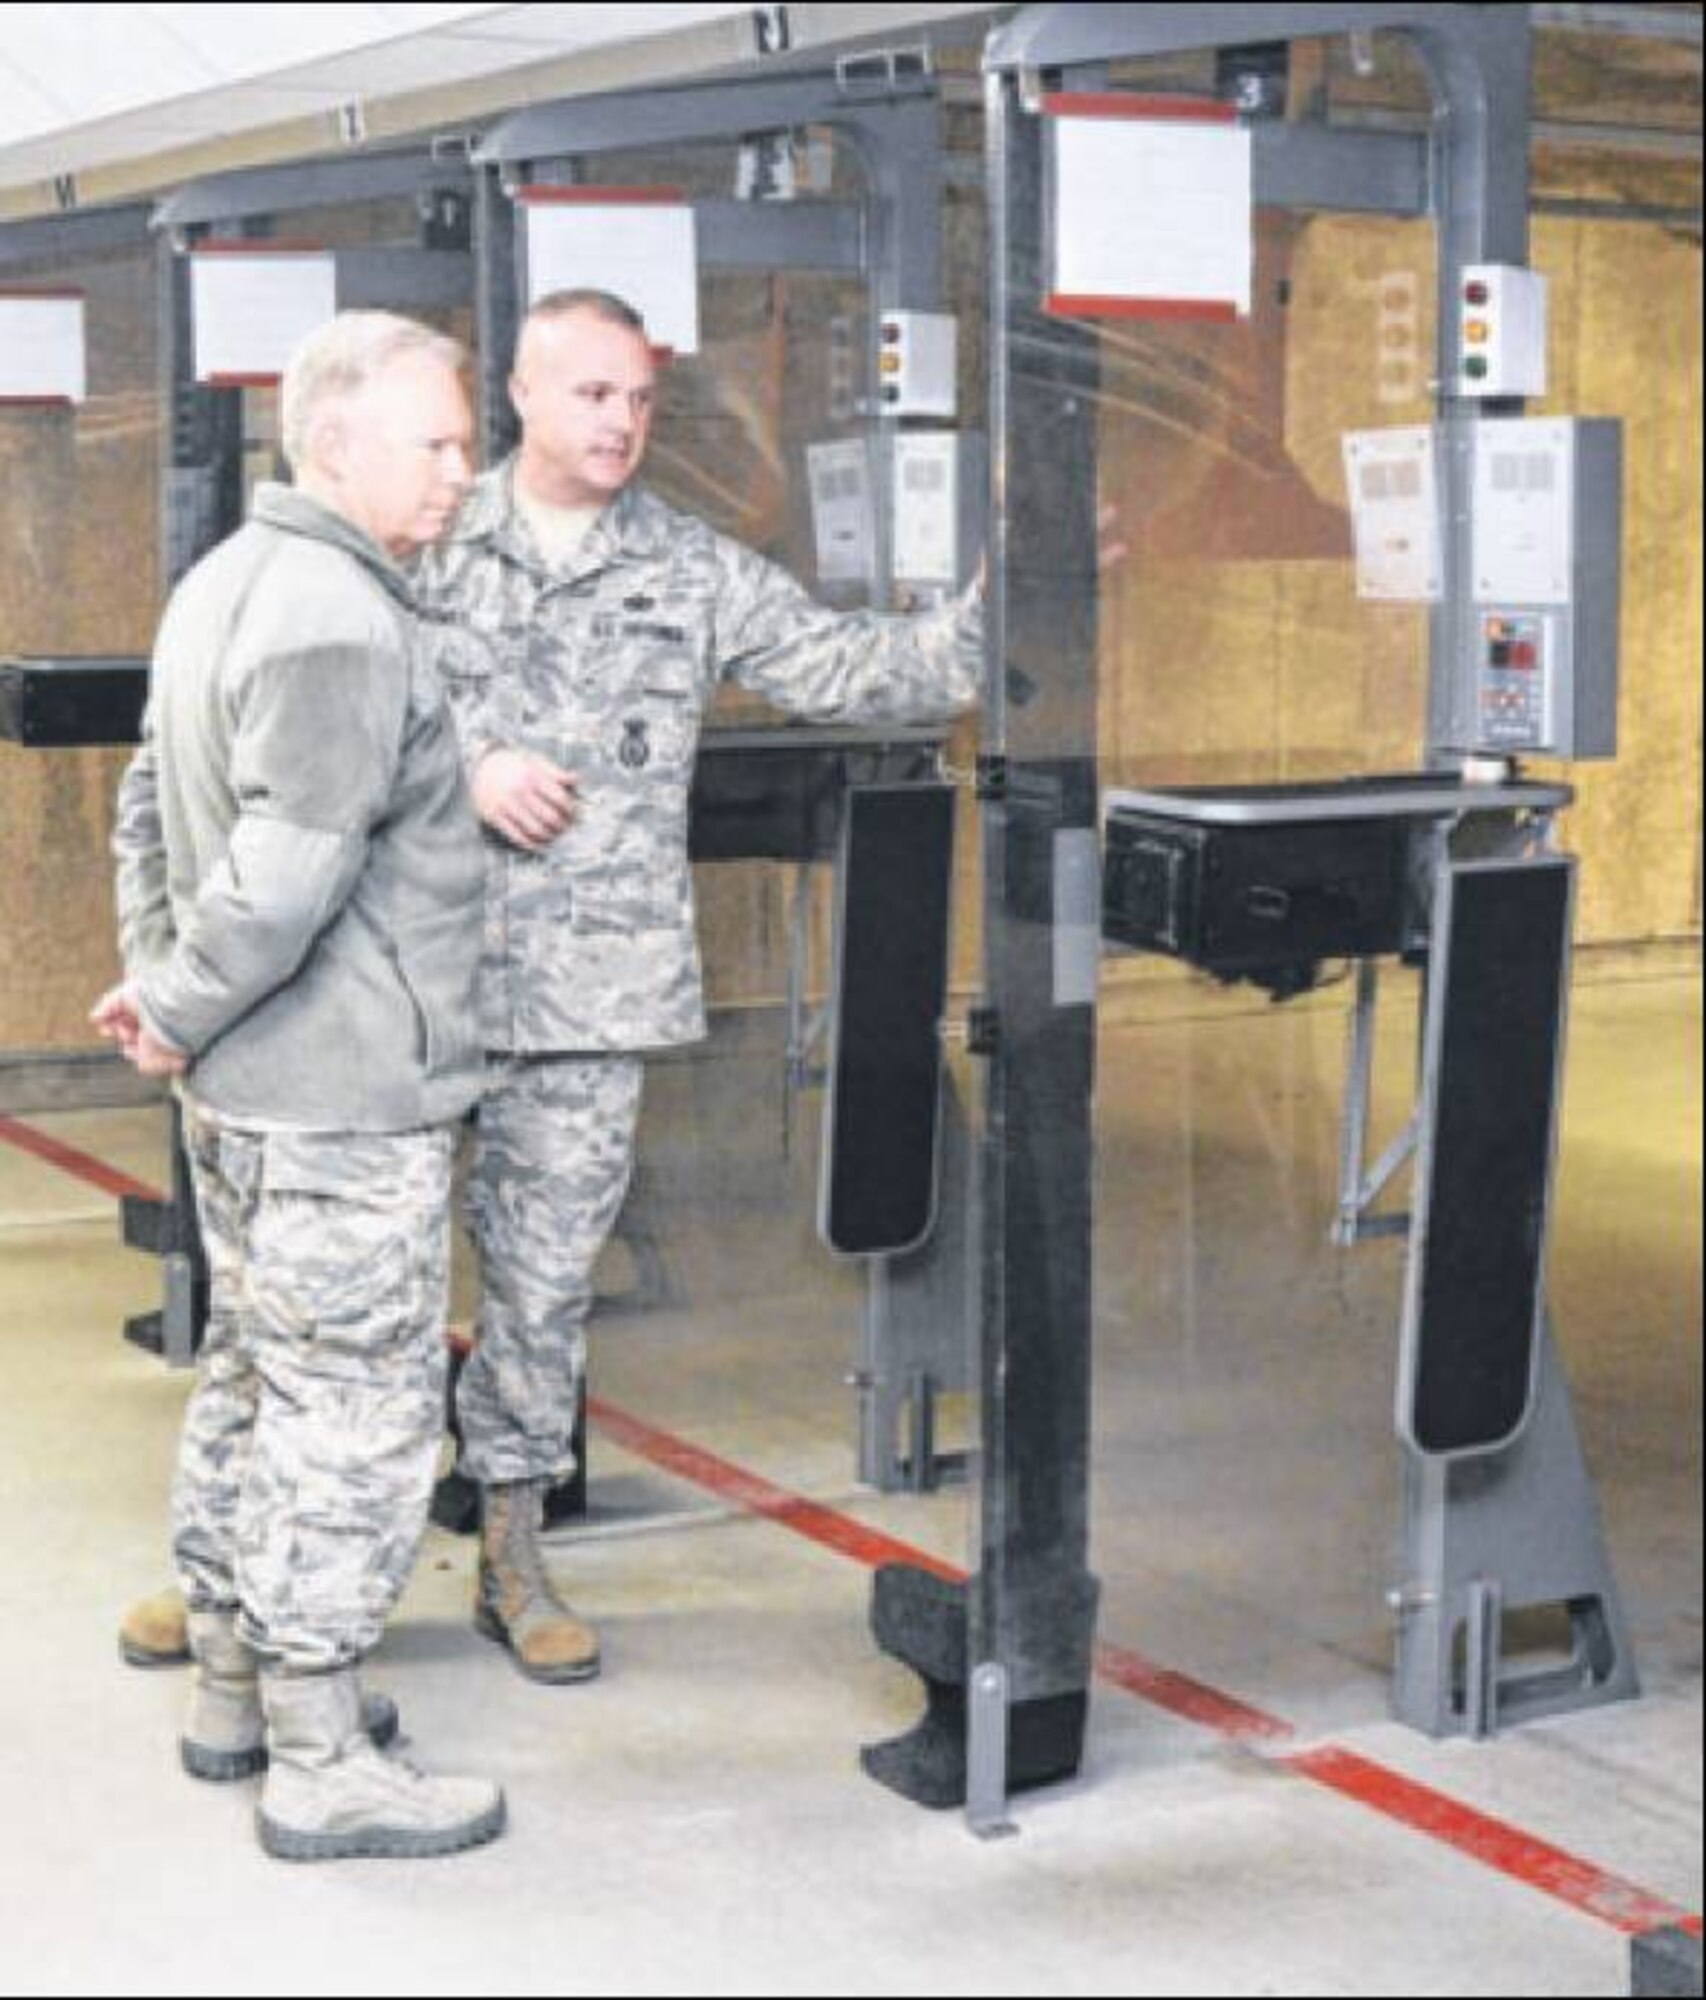 Sgt Bowes shows Lt. Gen. Thompson the indoor firing range and explains the uses of the range for different weapons during the general's visit. (Air Force Photos by Wesley Farnsworth)